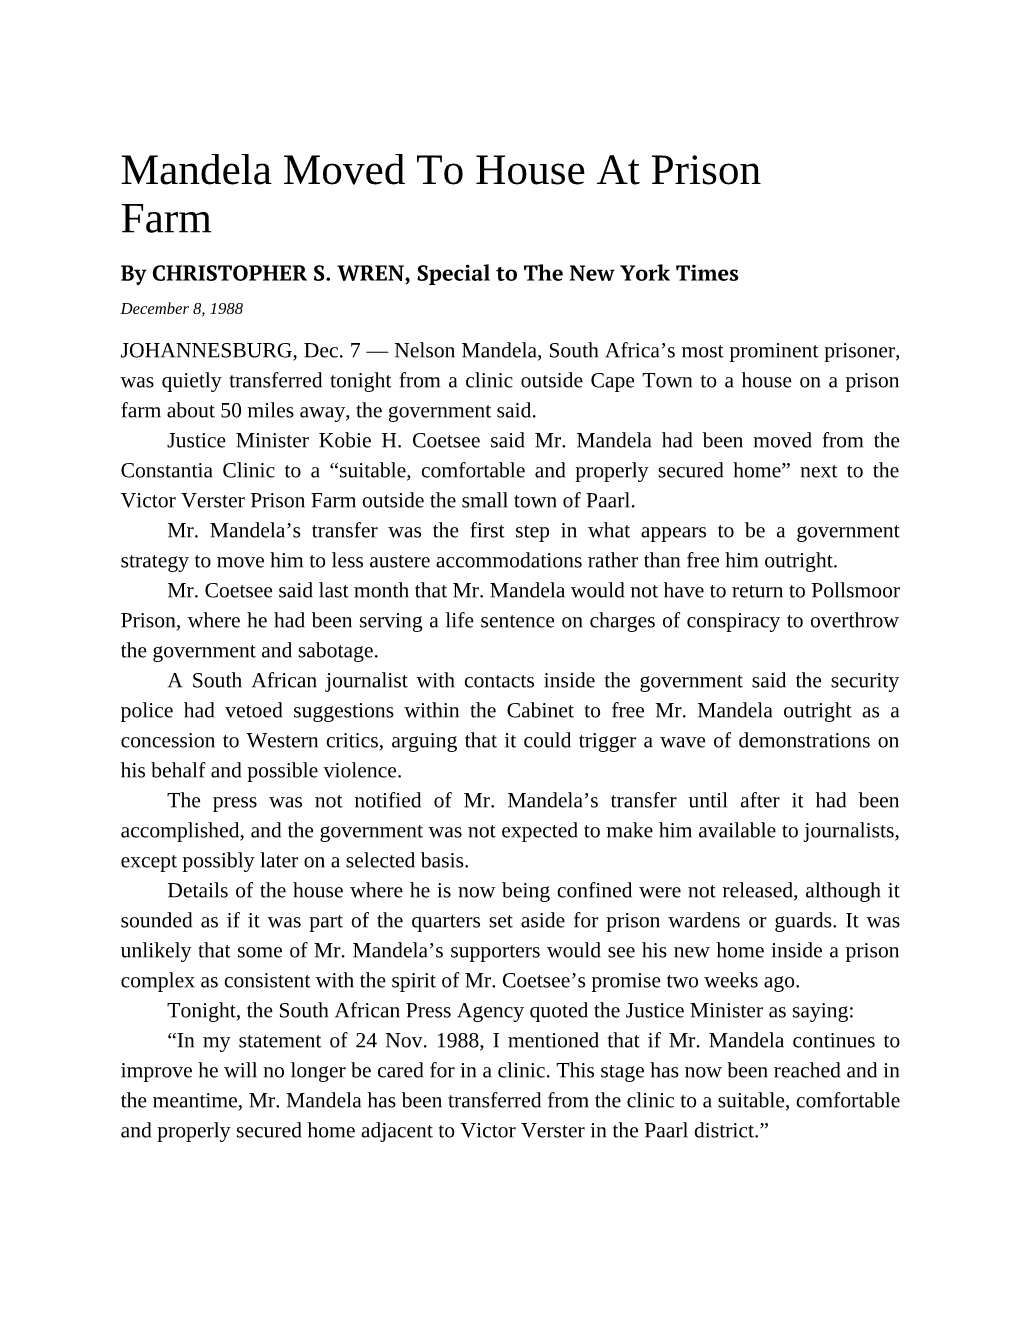 Mandela Moved to House at Prison Farm